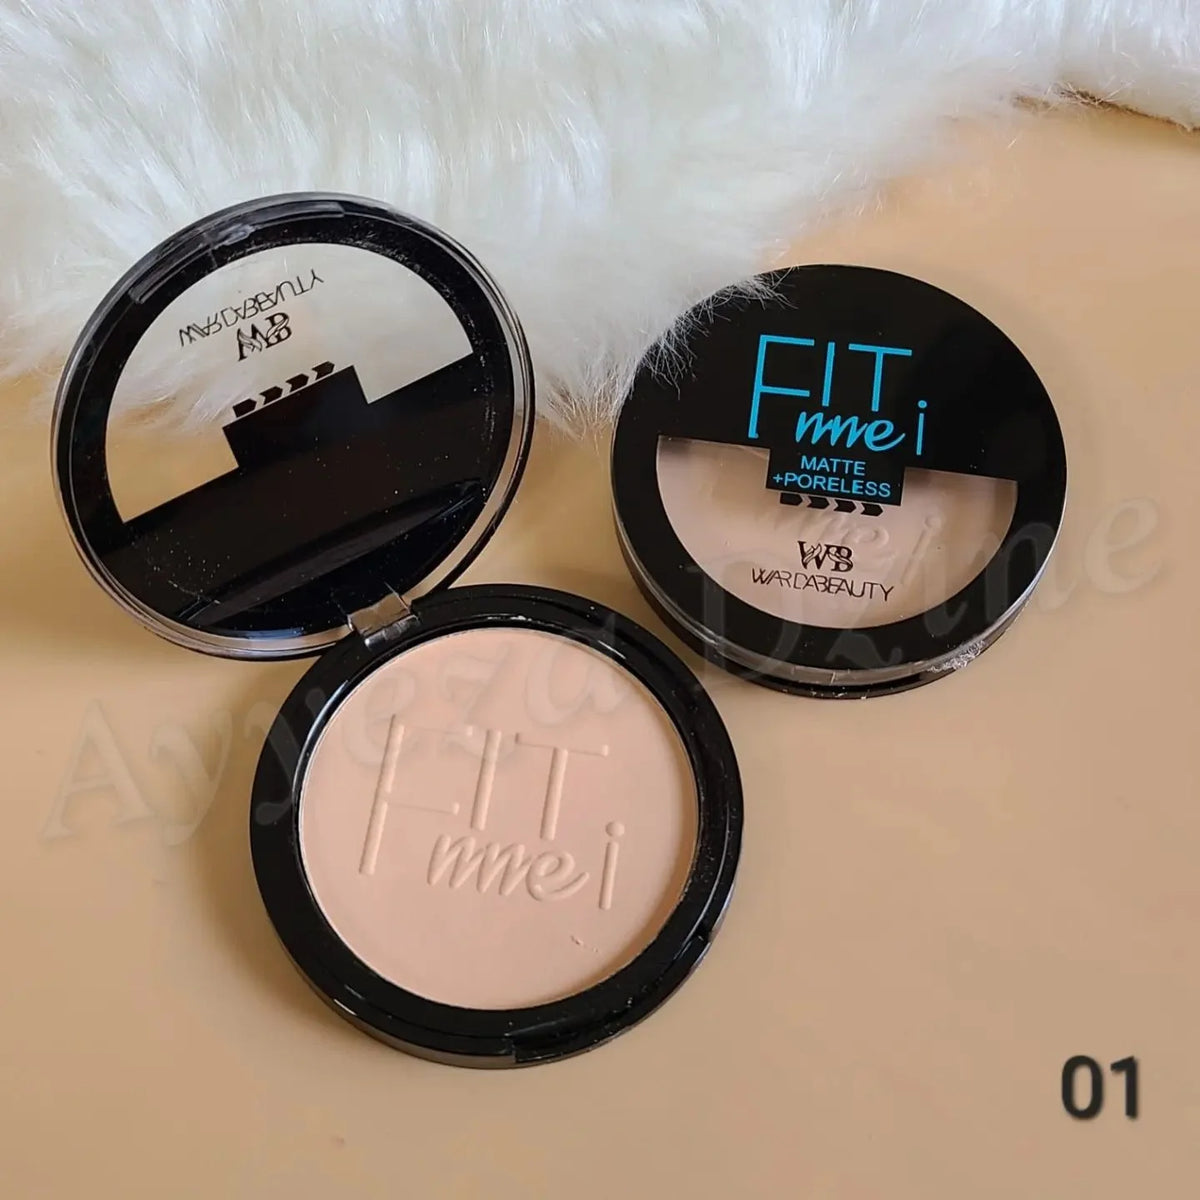 Wardabeauty Fitme Face Compact Powder